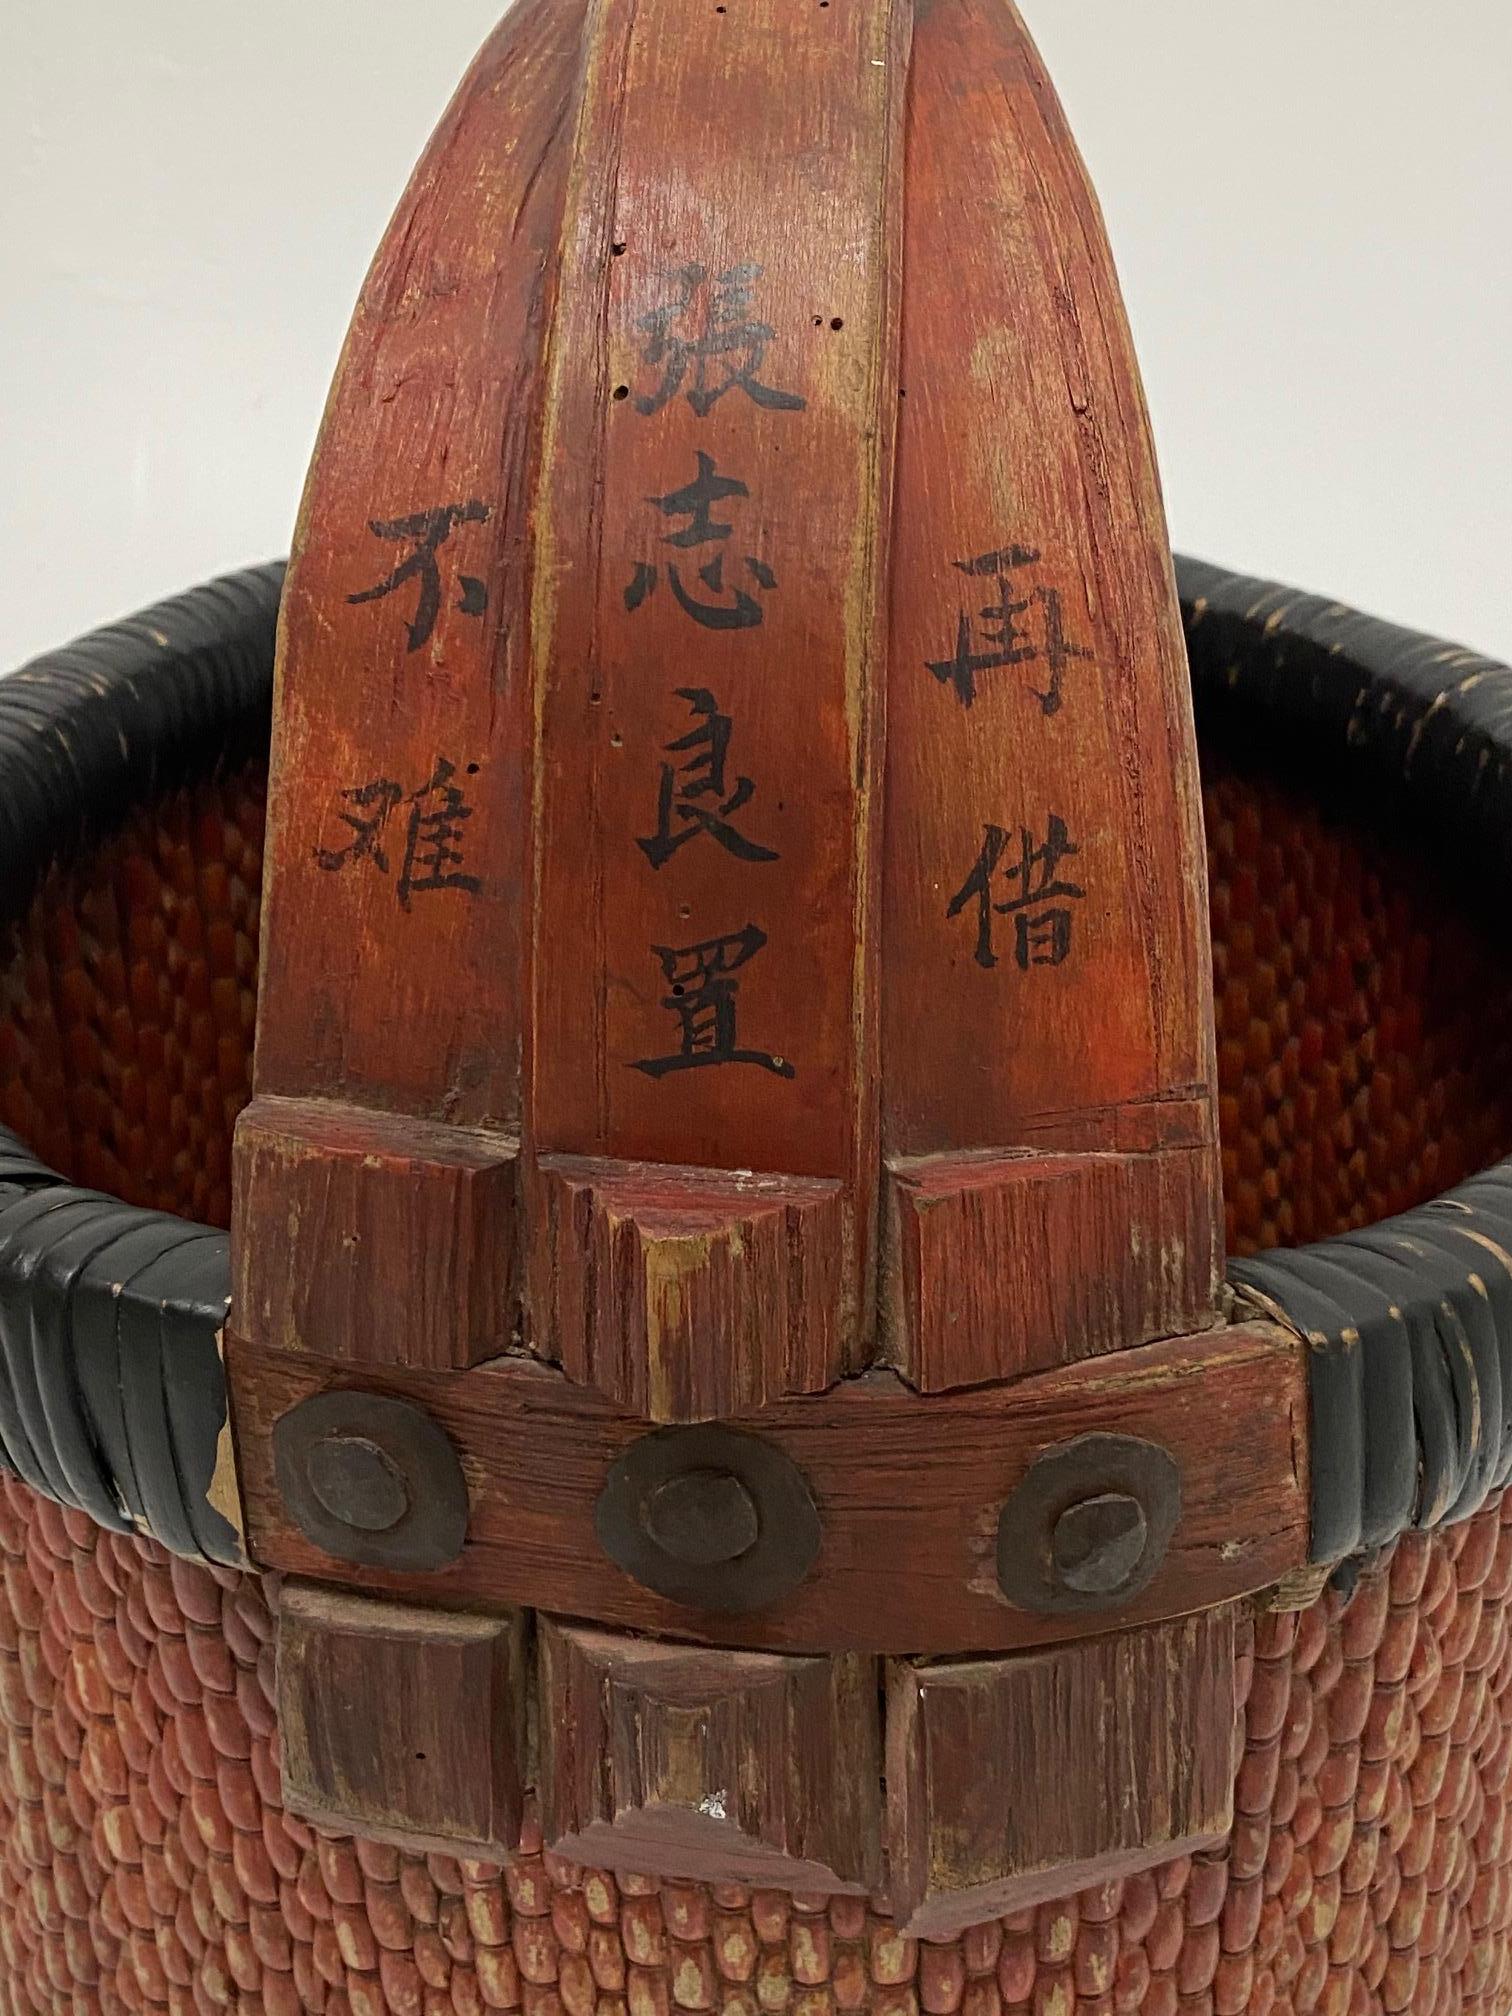 A wonderful Chinese woven rattan market basket having decorative writing on the wooden handle and a great reddish patina.